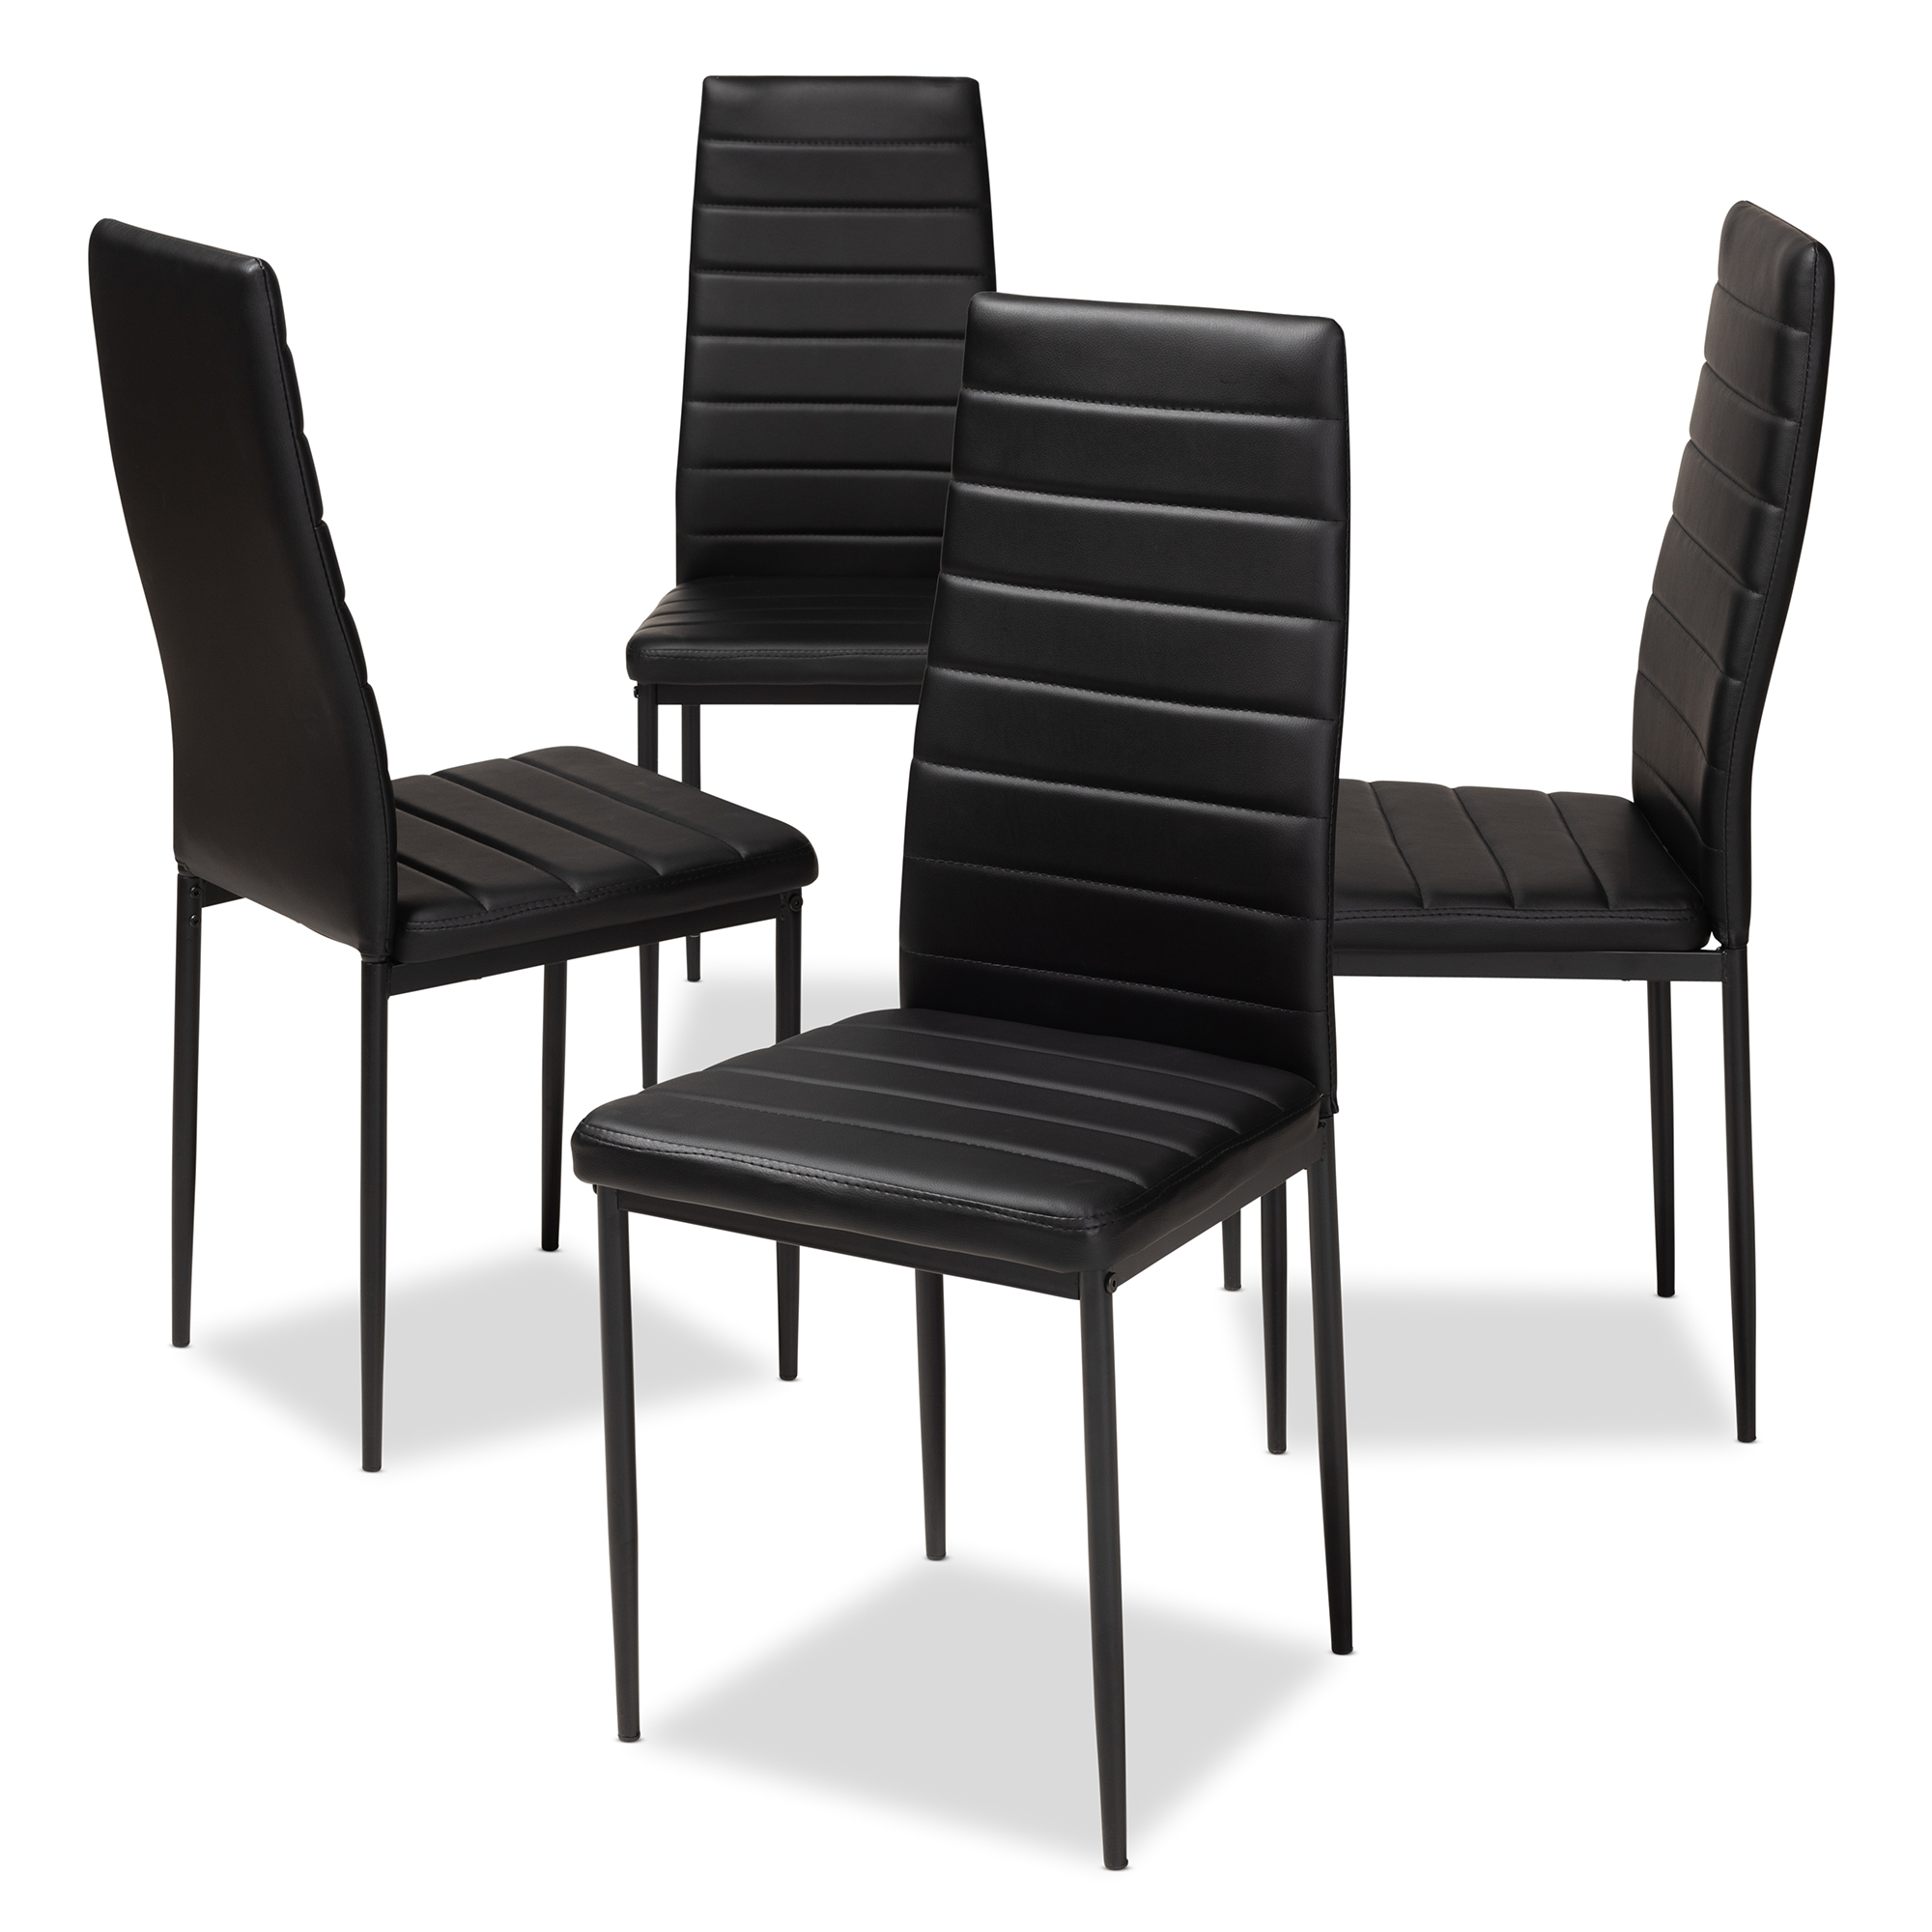 Baxton Studio Armand Modern and Contemporary Black Faux Leather Upholstered Dining Chair (Set of 4)